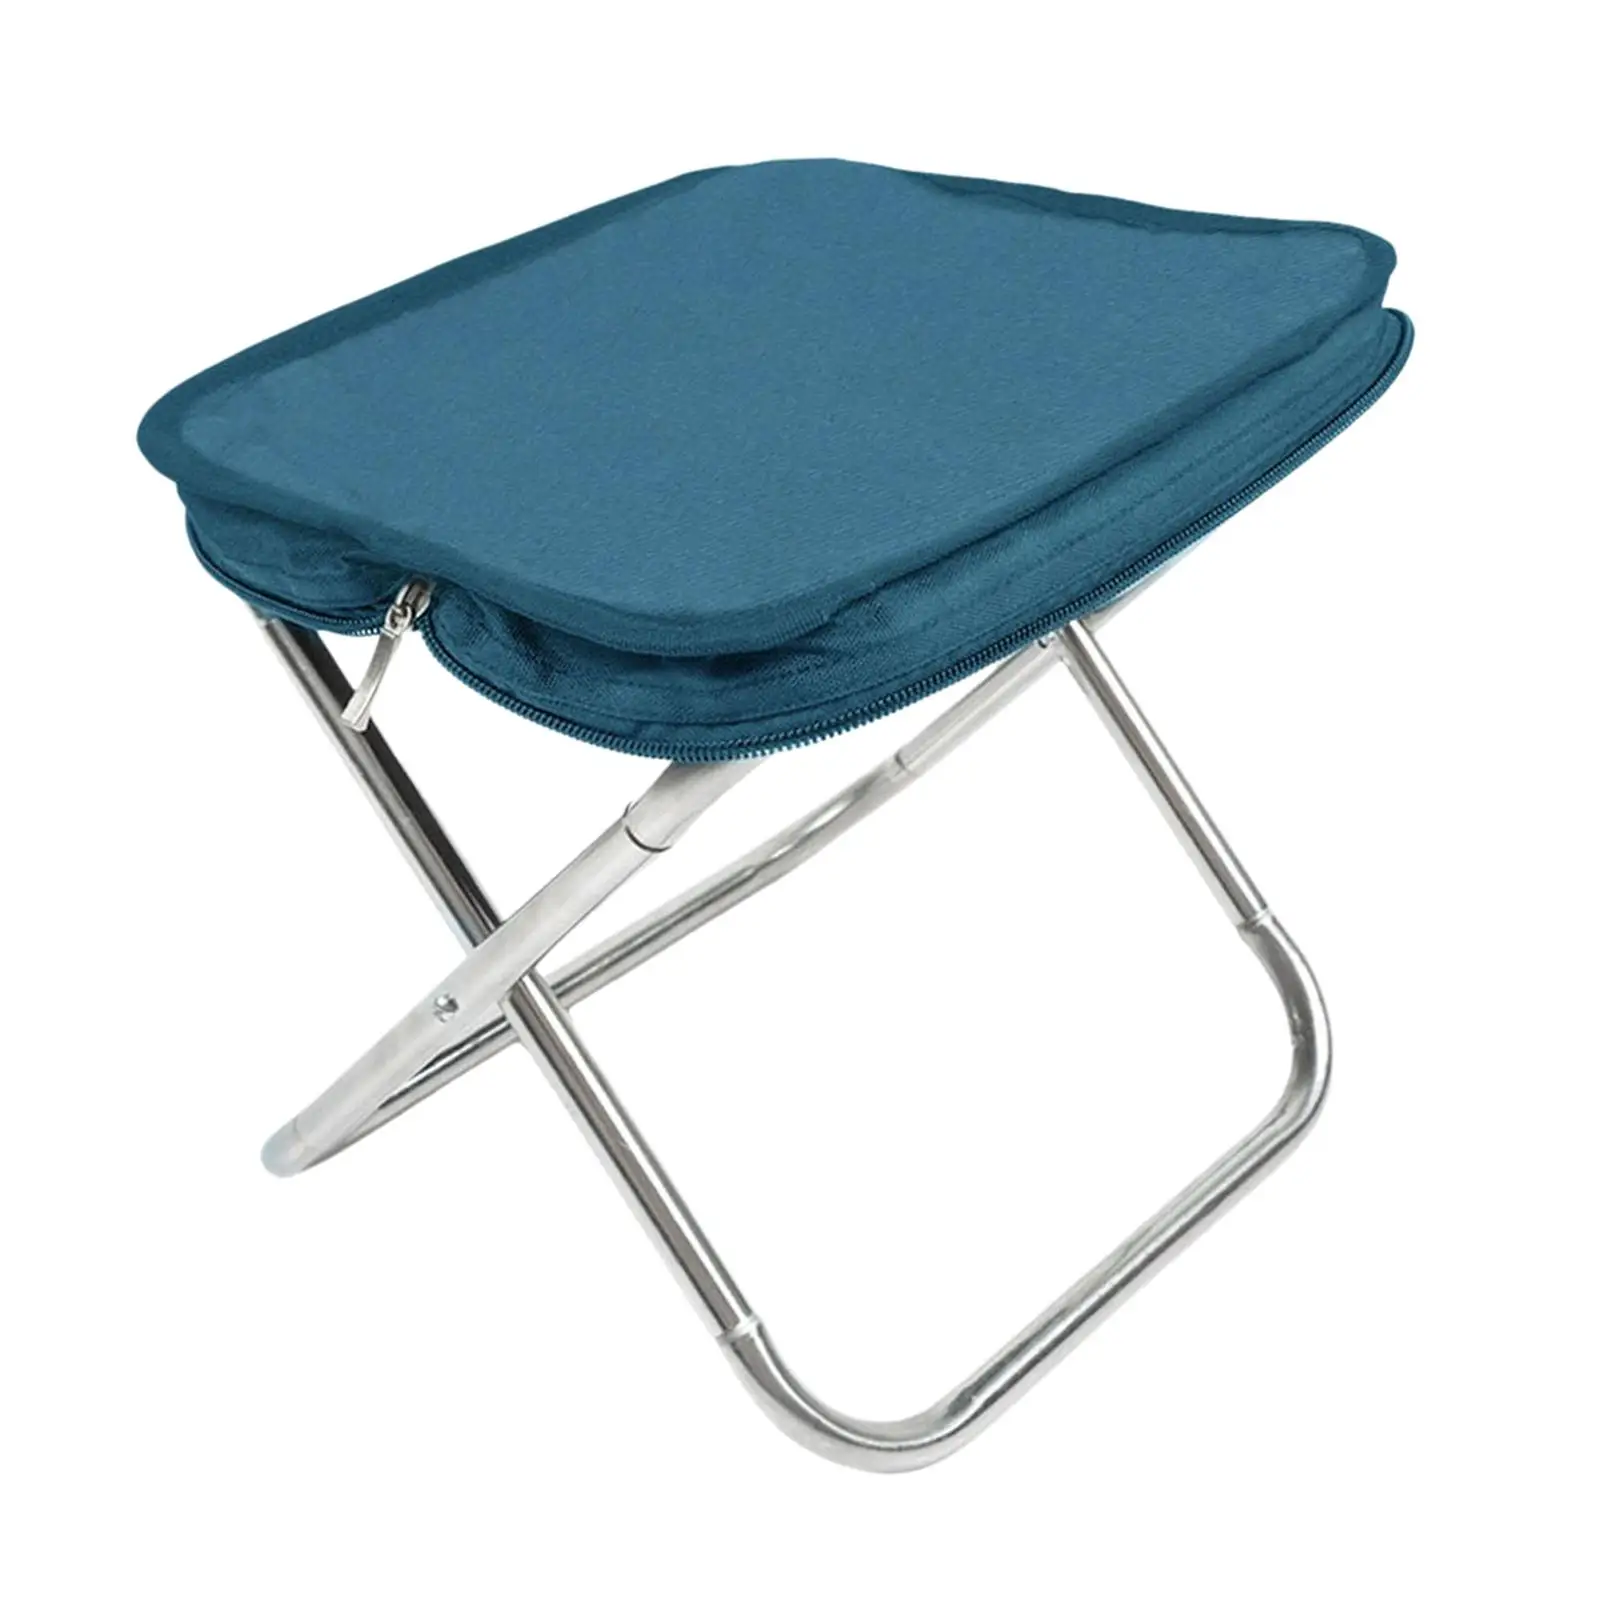 Lightweight Camping Stool Mini Size Convenient Carry Ultralight Comfortable Folding Fishing Chair for Beach Outdoor Backpacking